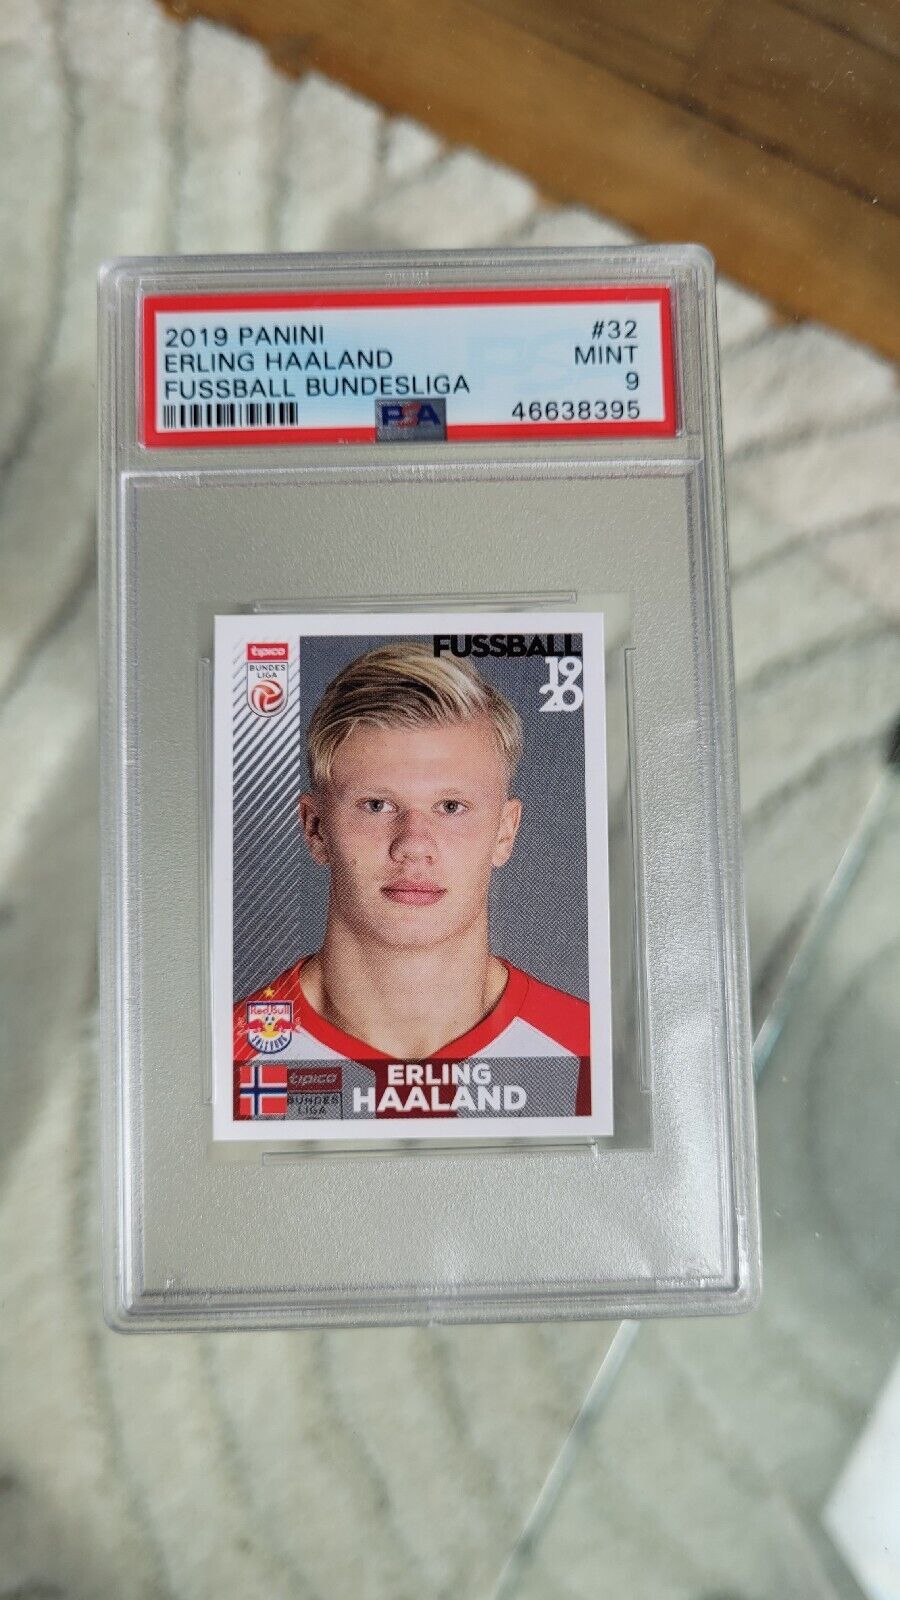 Erling Haaland Panini Rookie Card #32 PSA 9 MINT GREAT INVESTMENT  